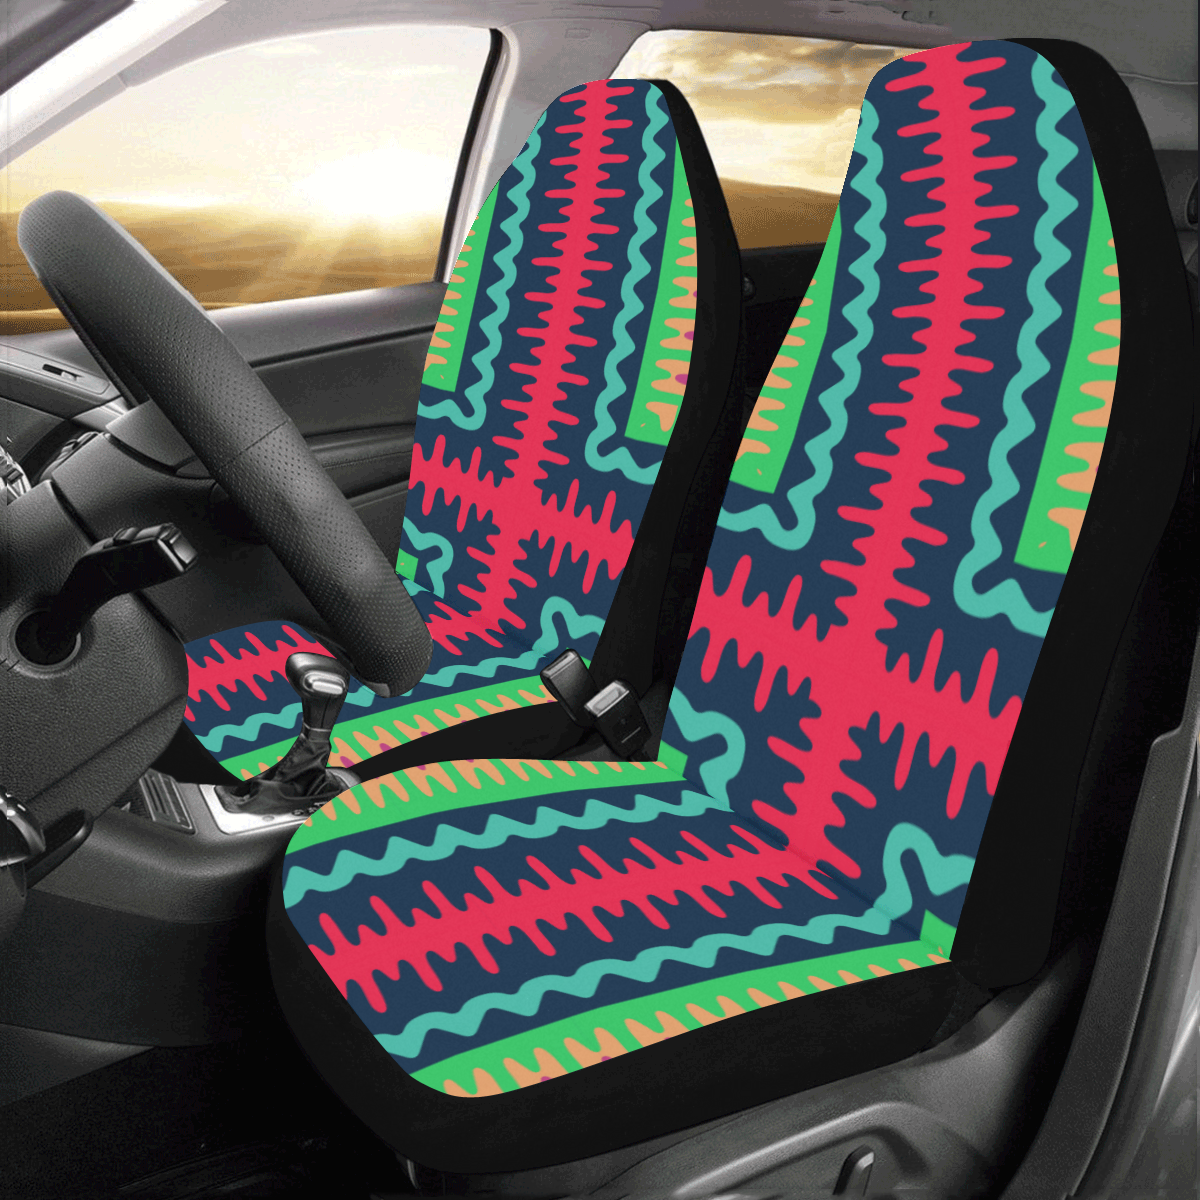 Waves in retro colors Car Seat Covers (Set of 2)